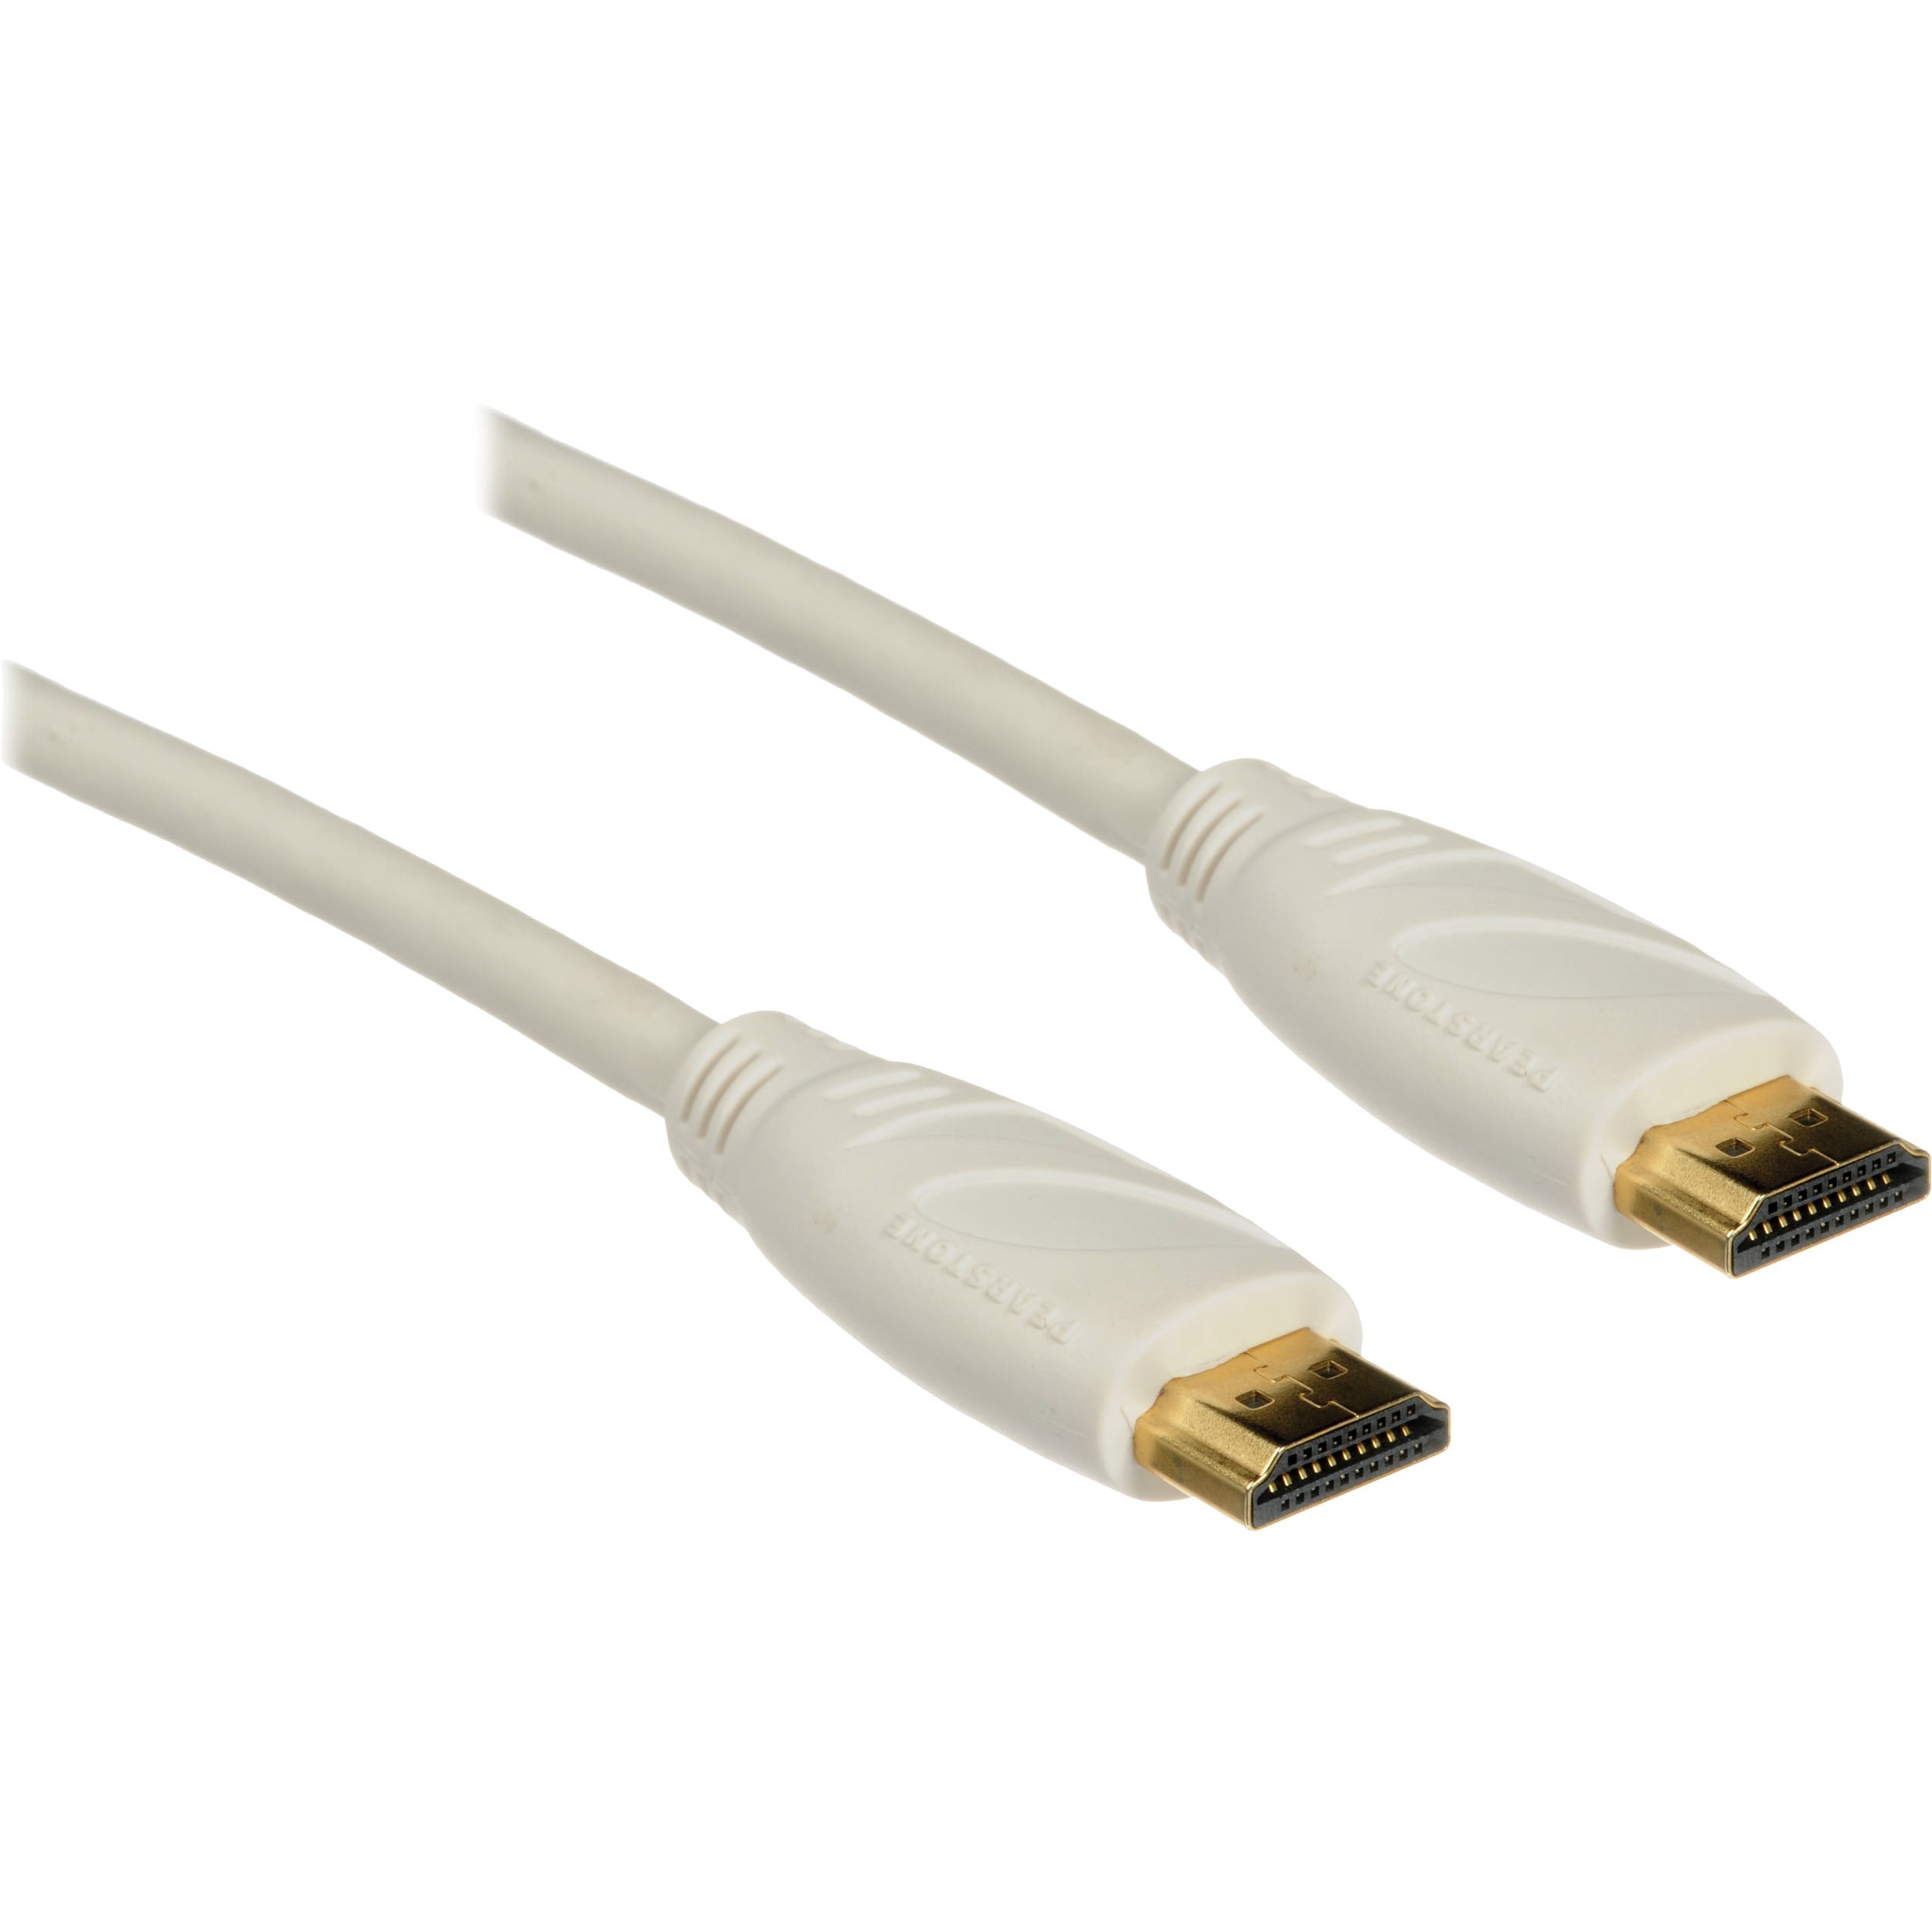 Pearstone HDA-1015W High-Speed HDMI Cable with Ethernet (White, 1.5')